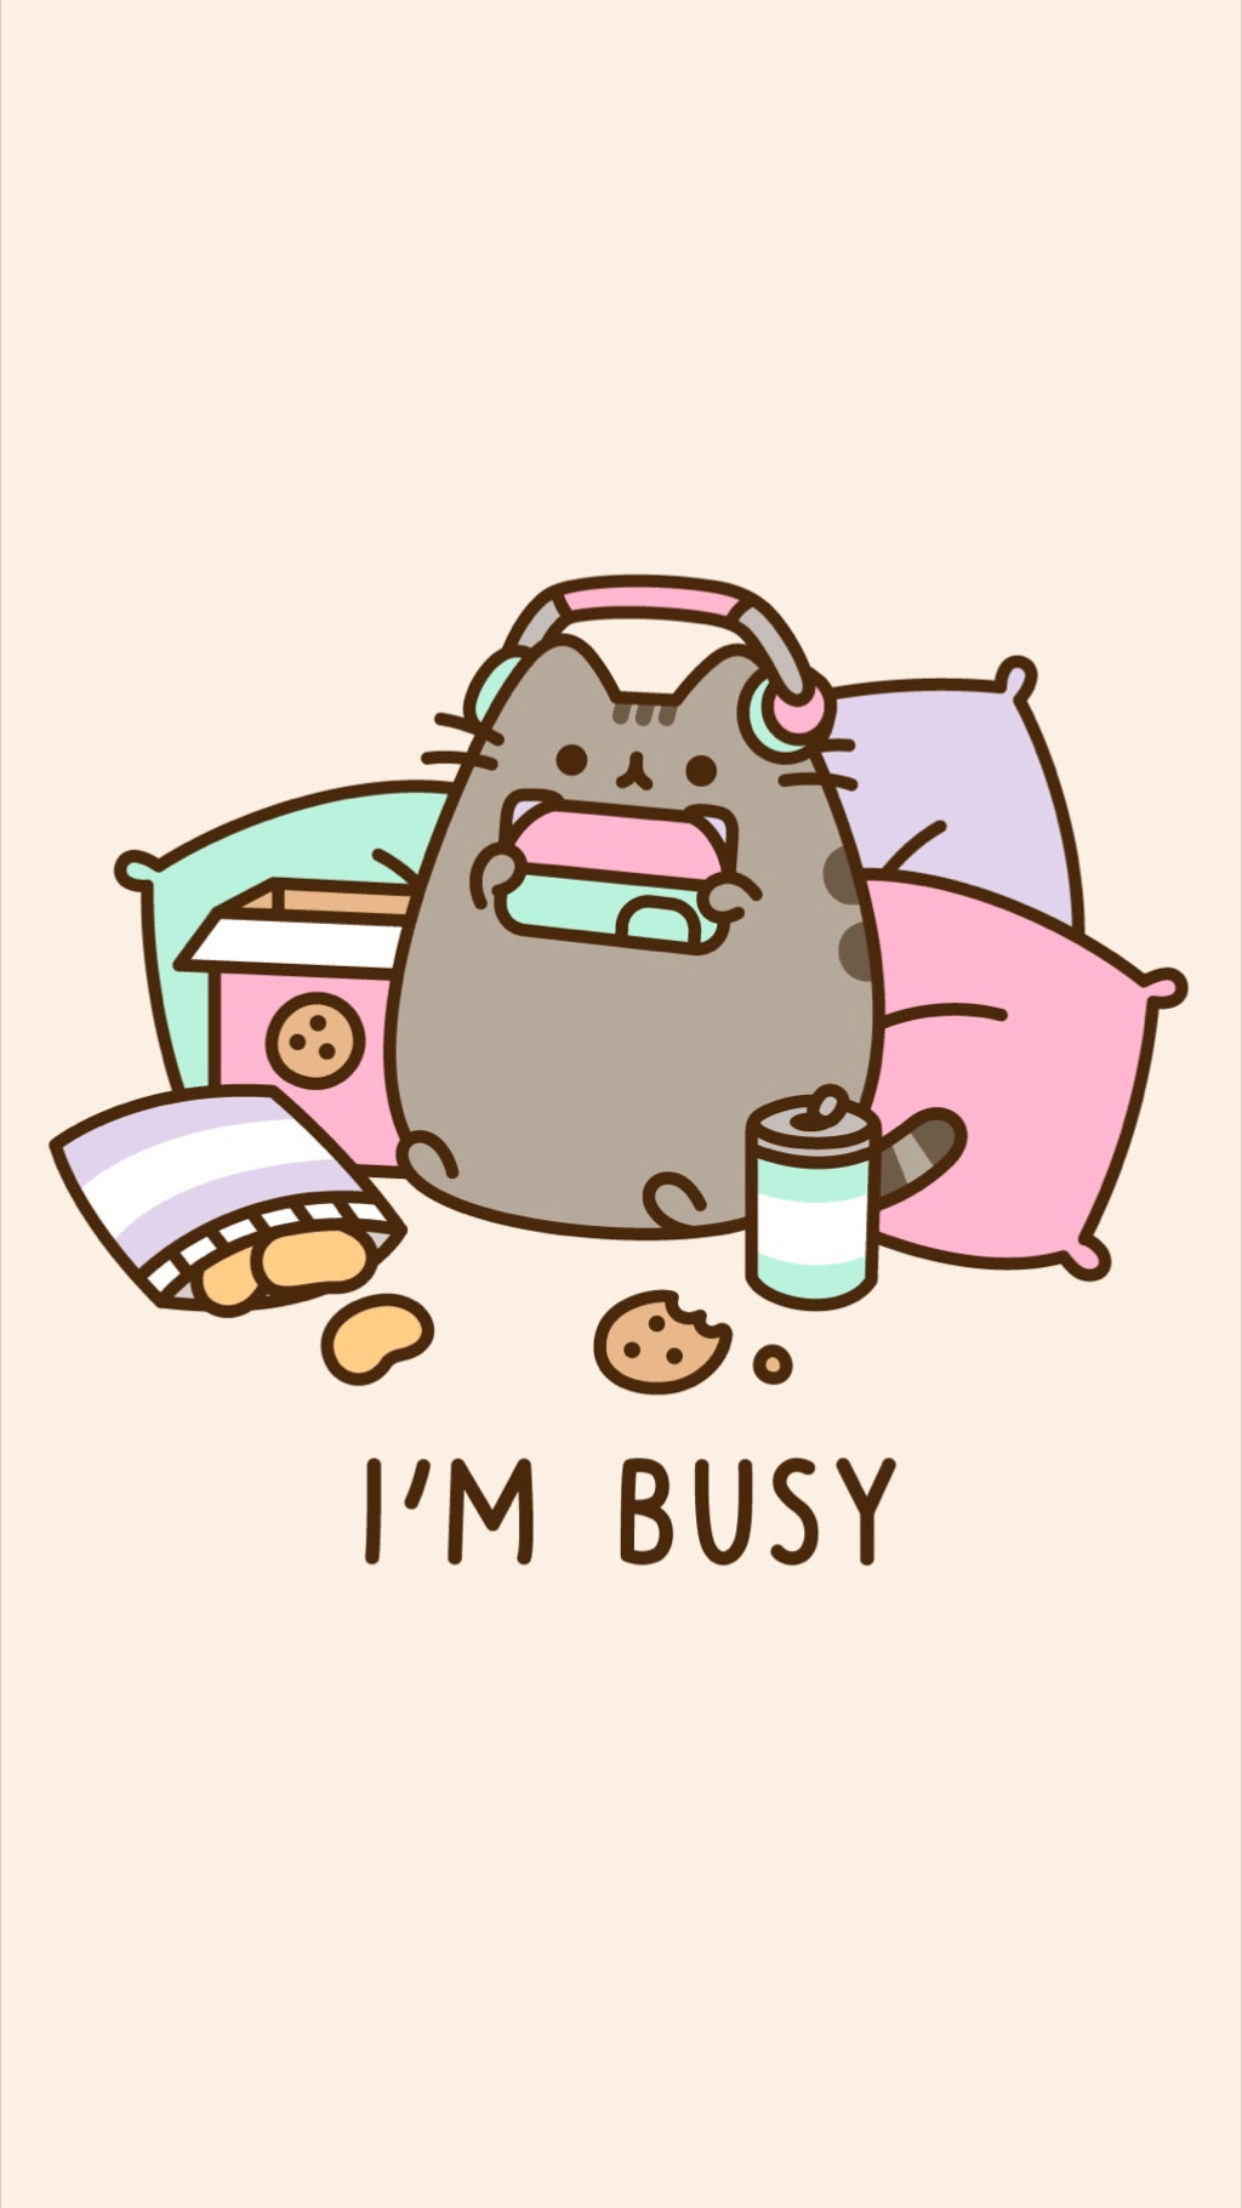 Don't bother me, I'm busy. Lol. Pusheen is so cute. Me on friday